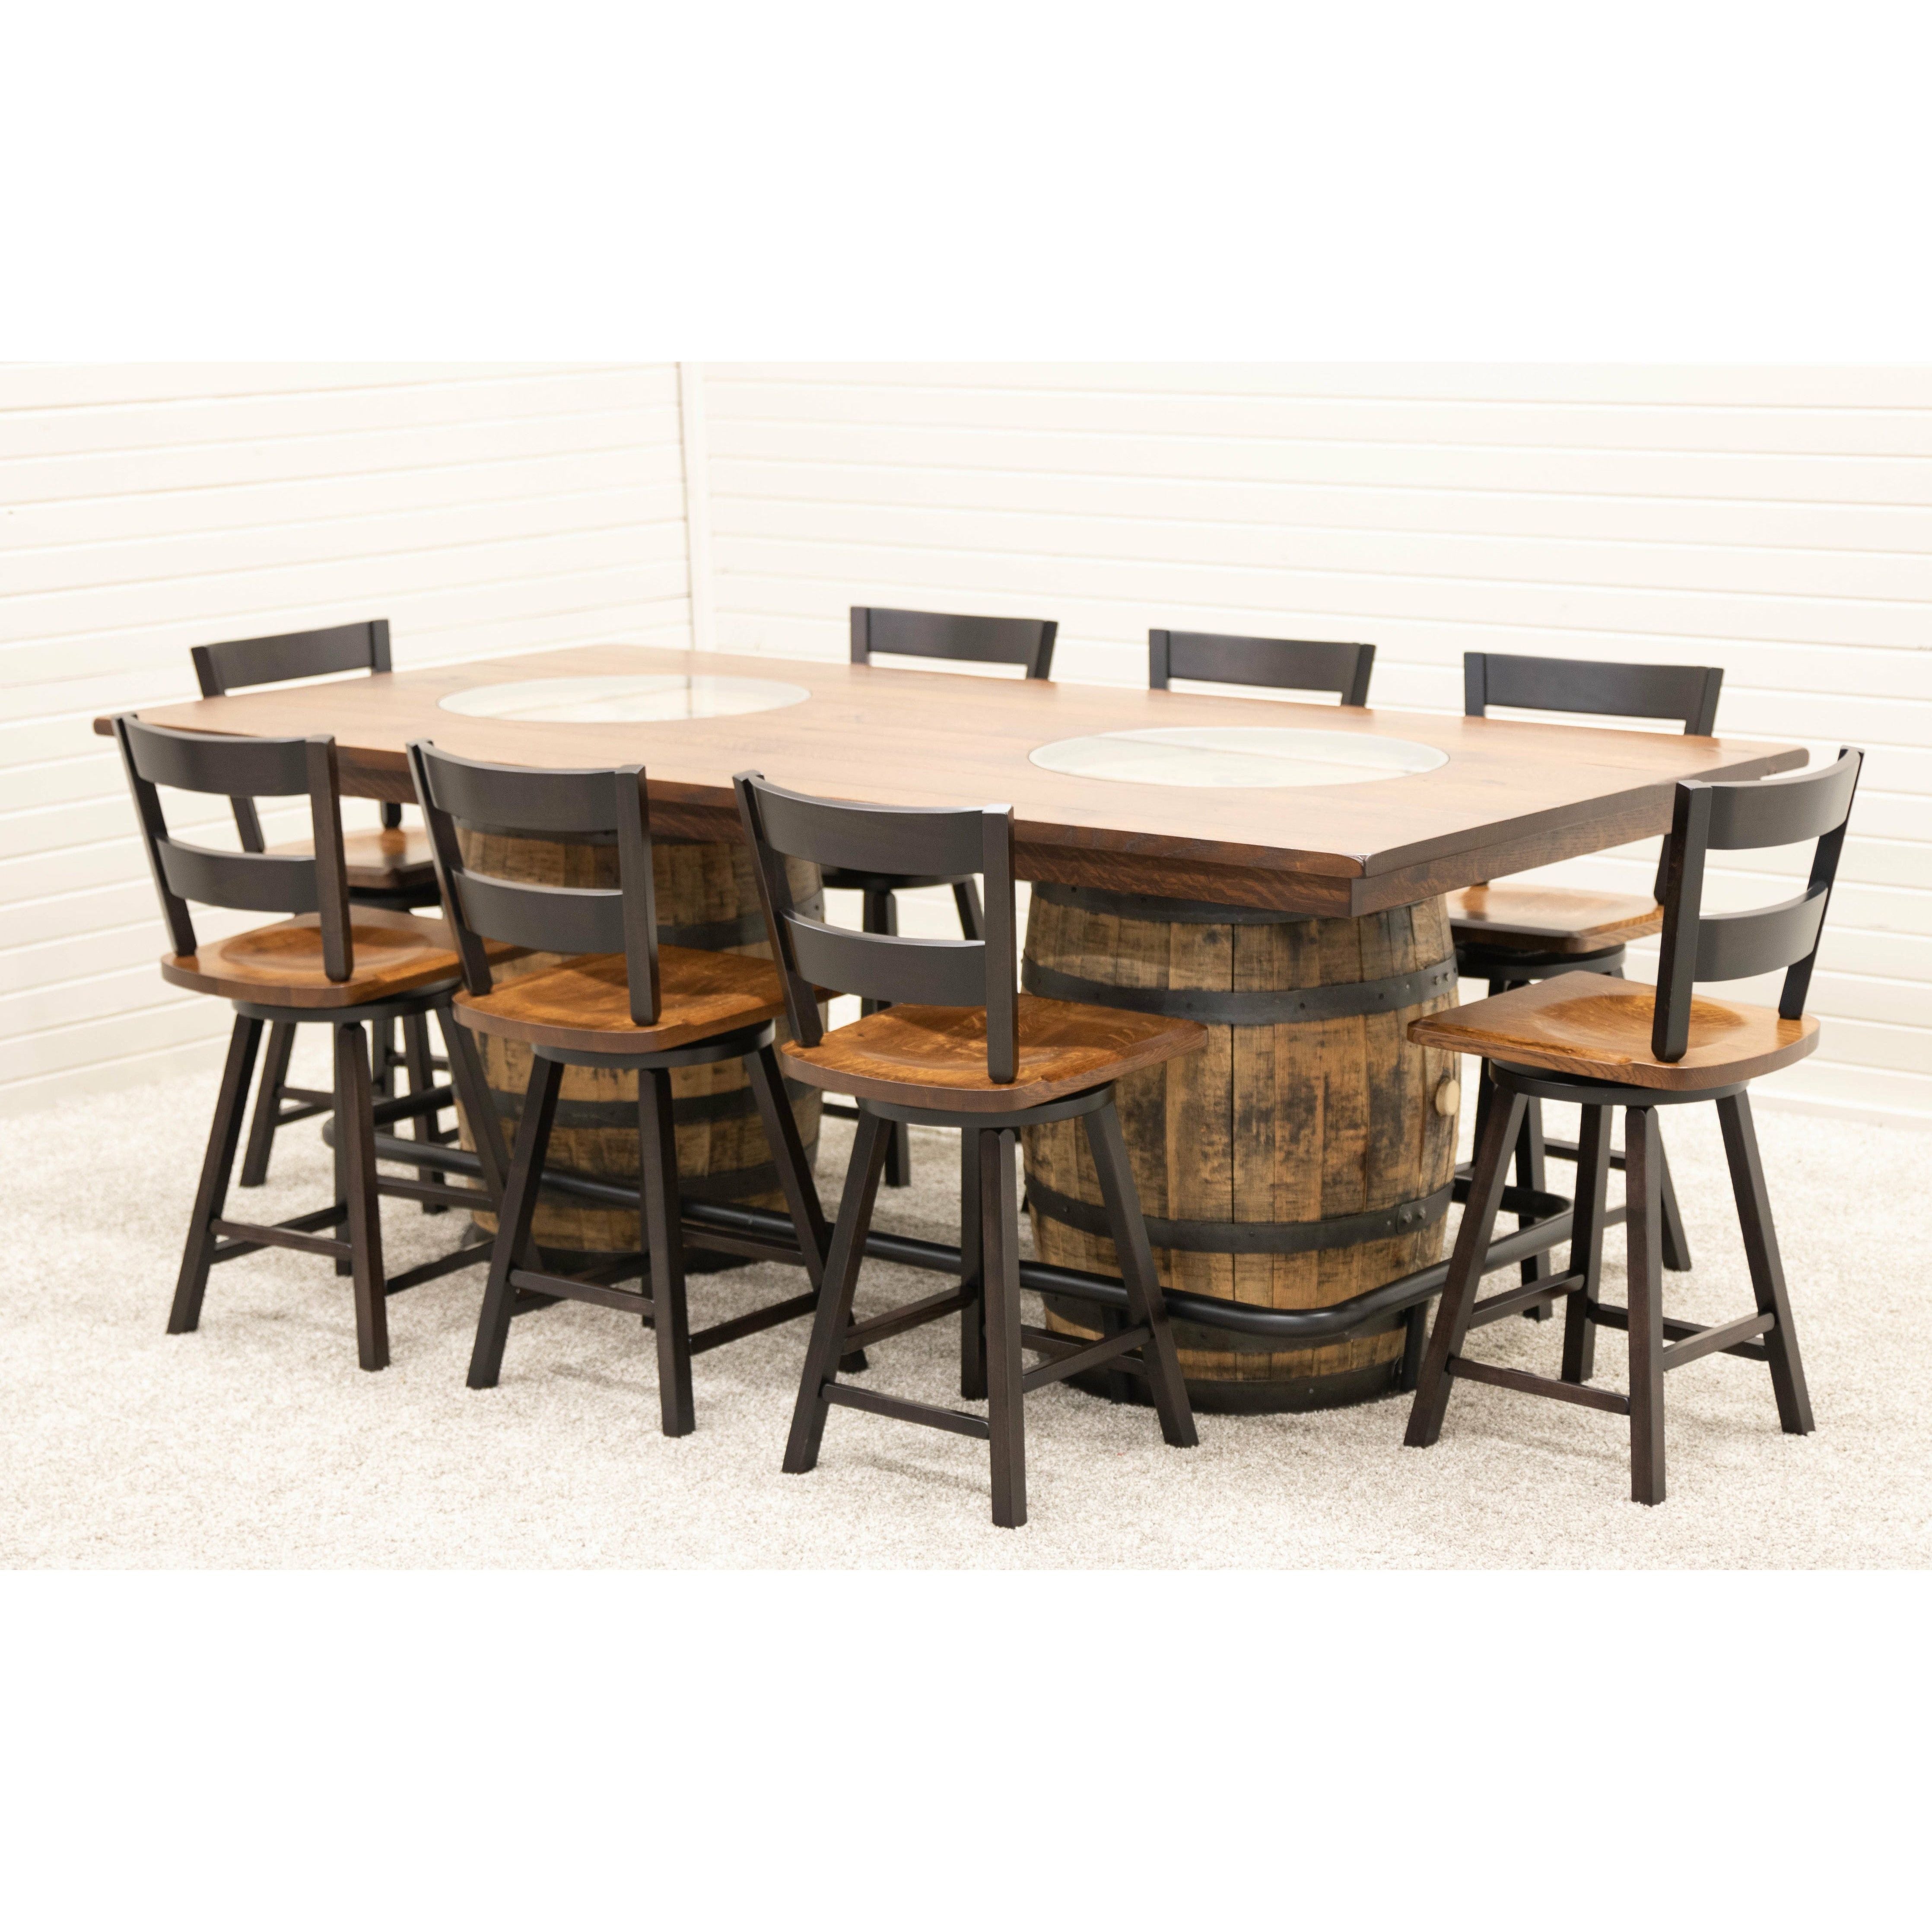 Whiskey Personalized Double Barrel Pub Table